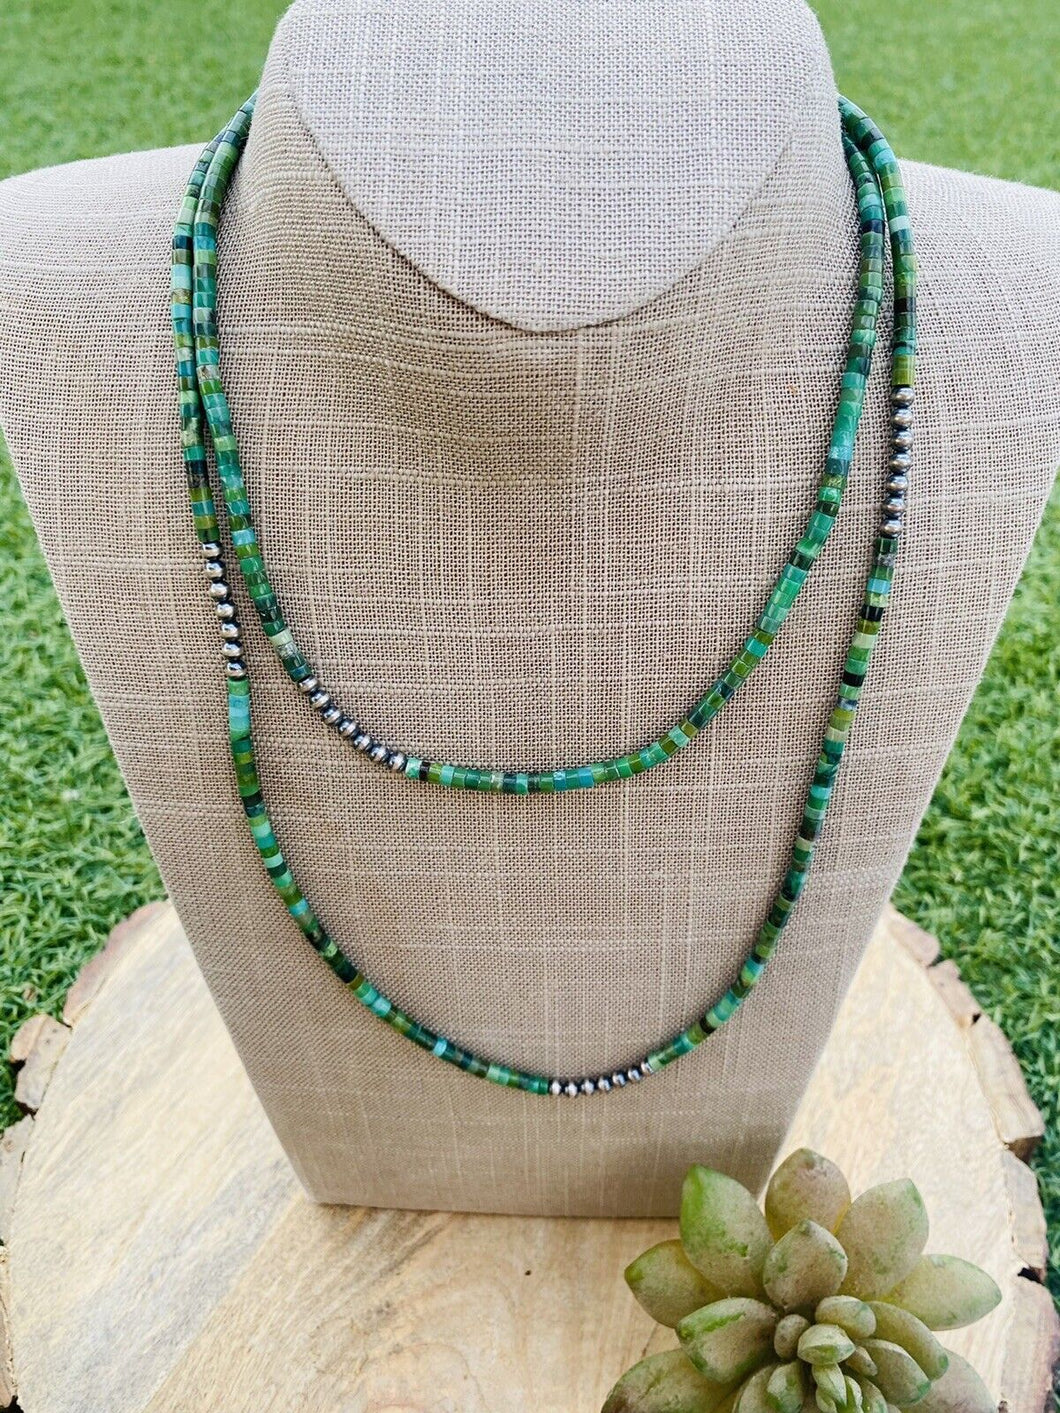 Navajo Turquoise & Sterling Silver Beaded 40 Inch Necklace